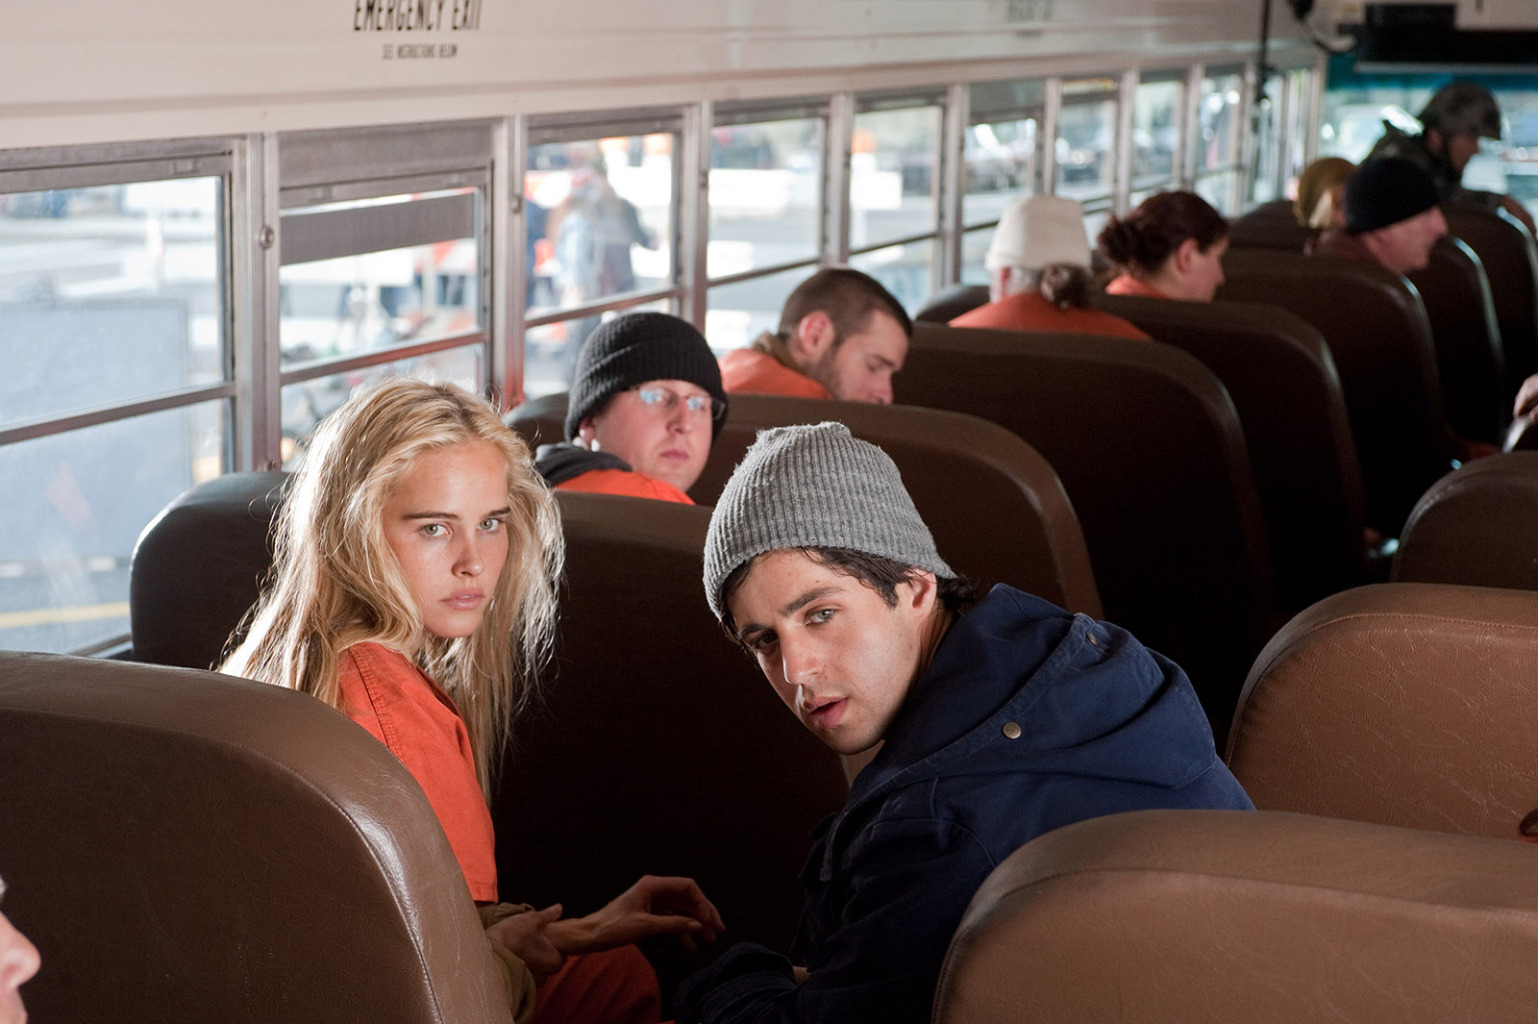 isabel lucas and josh peck